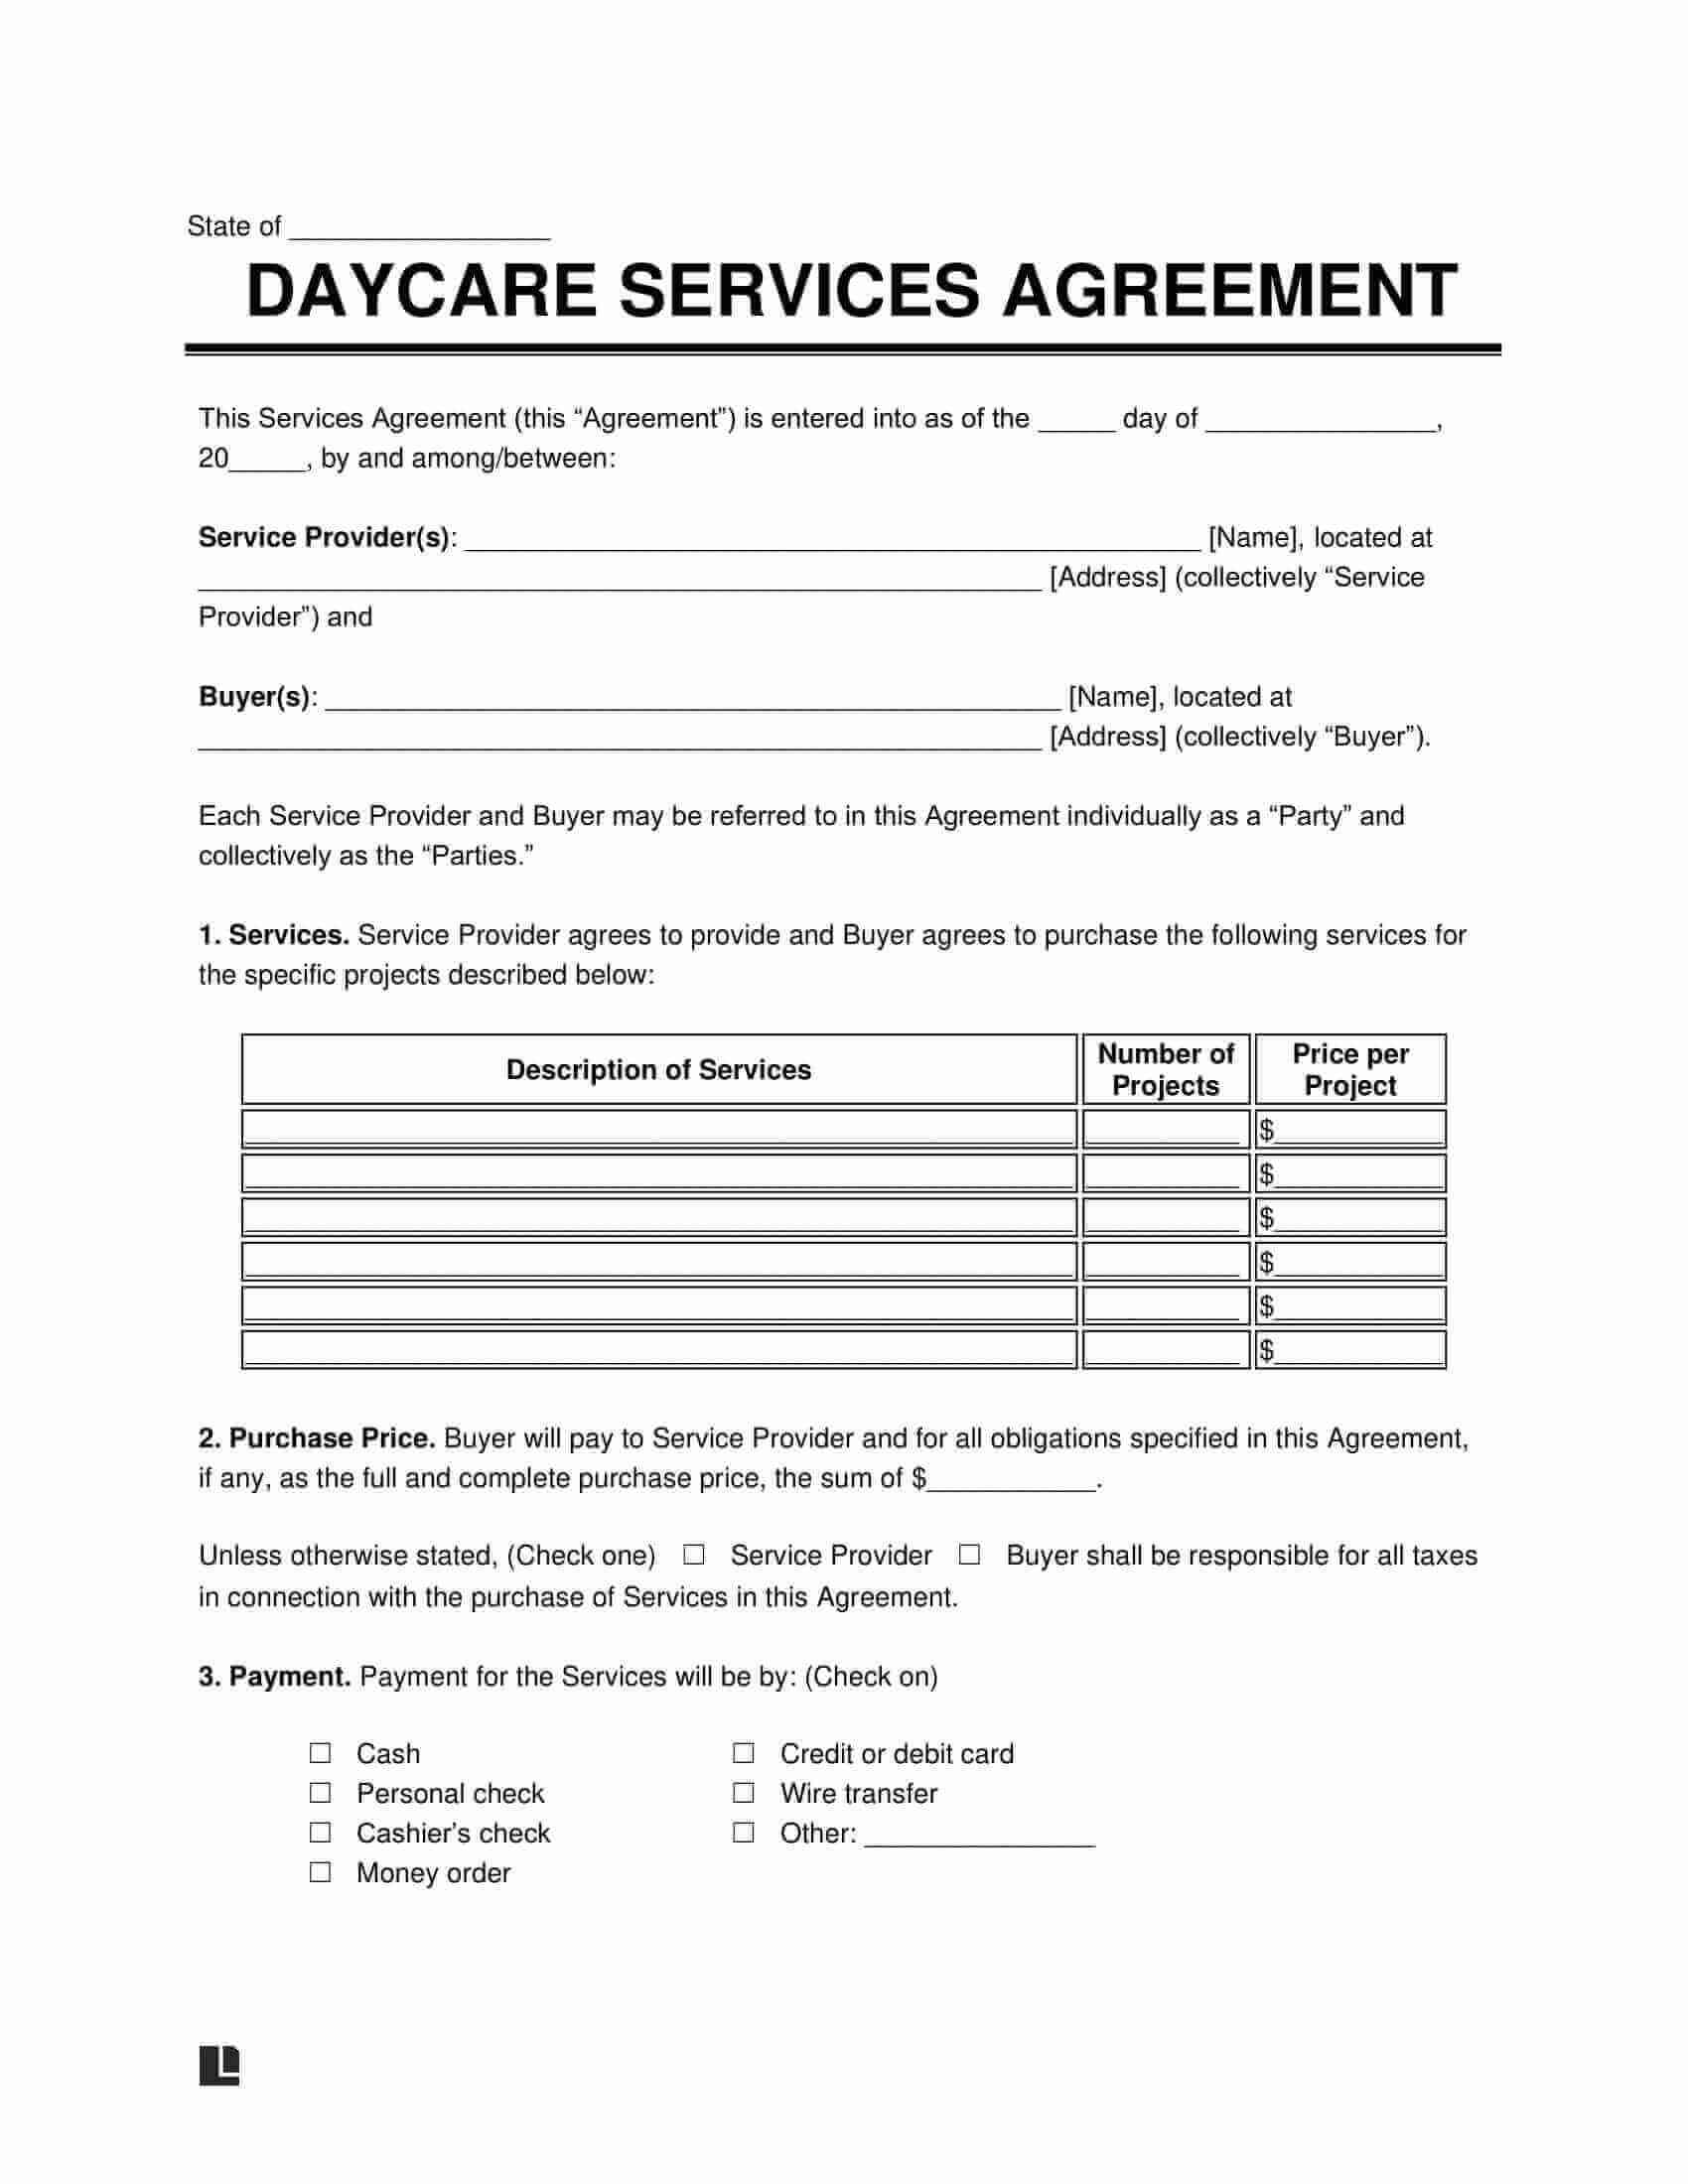 daycare-services-agreement